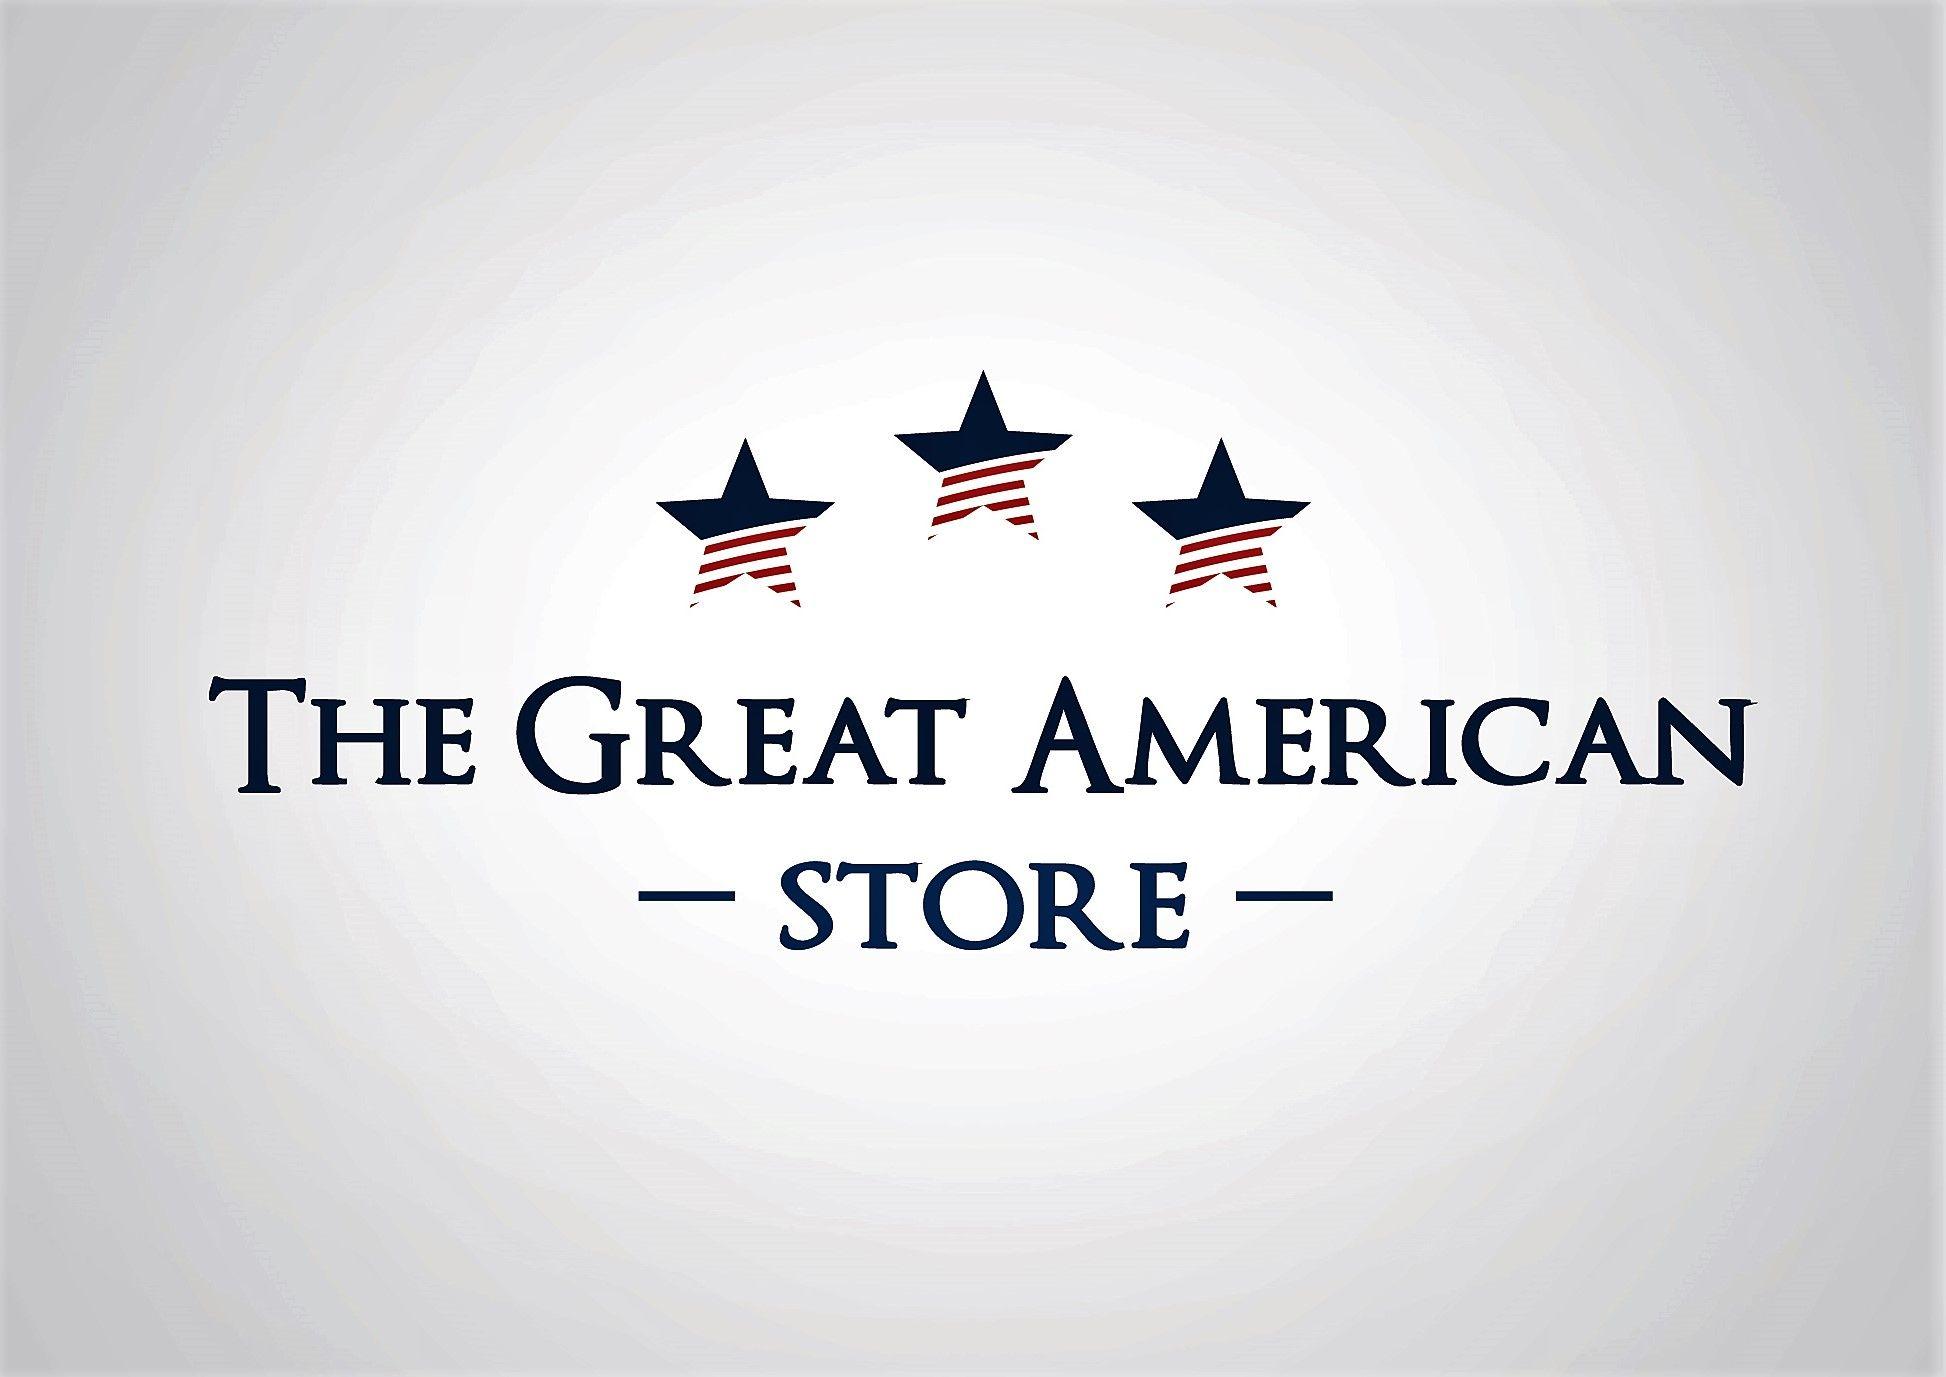 American Stores Brand Logo - Amazon.com: The Great American Store